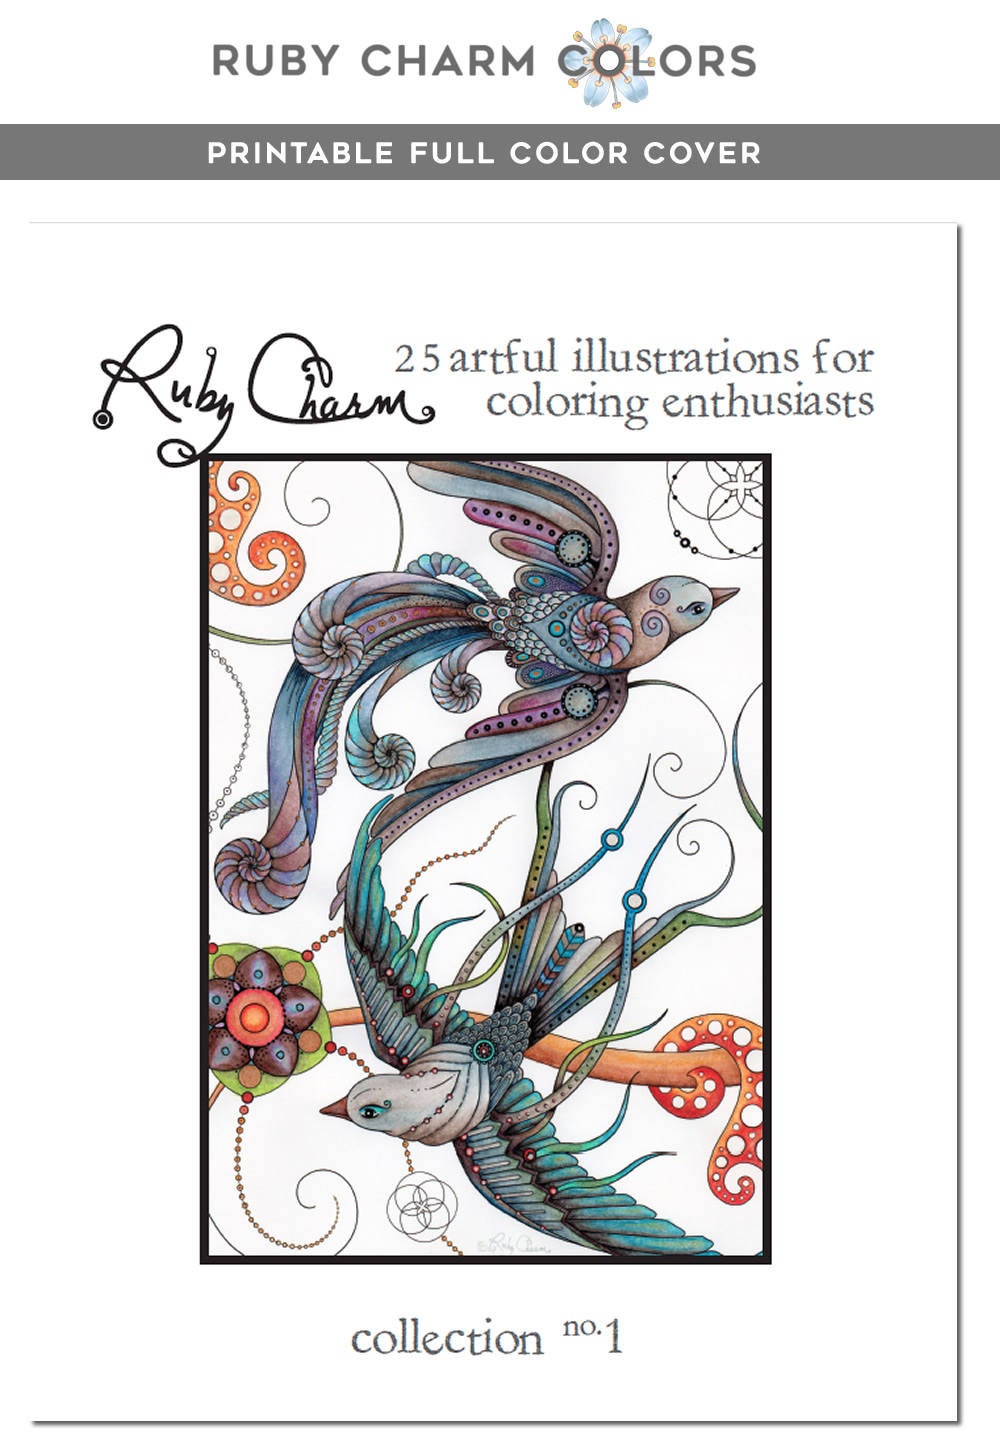 The Original Ruby Charm Colors Coloring Book - Digital version: Instantly download and print